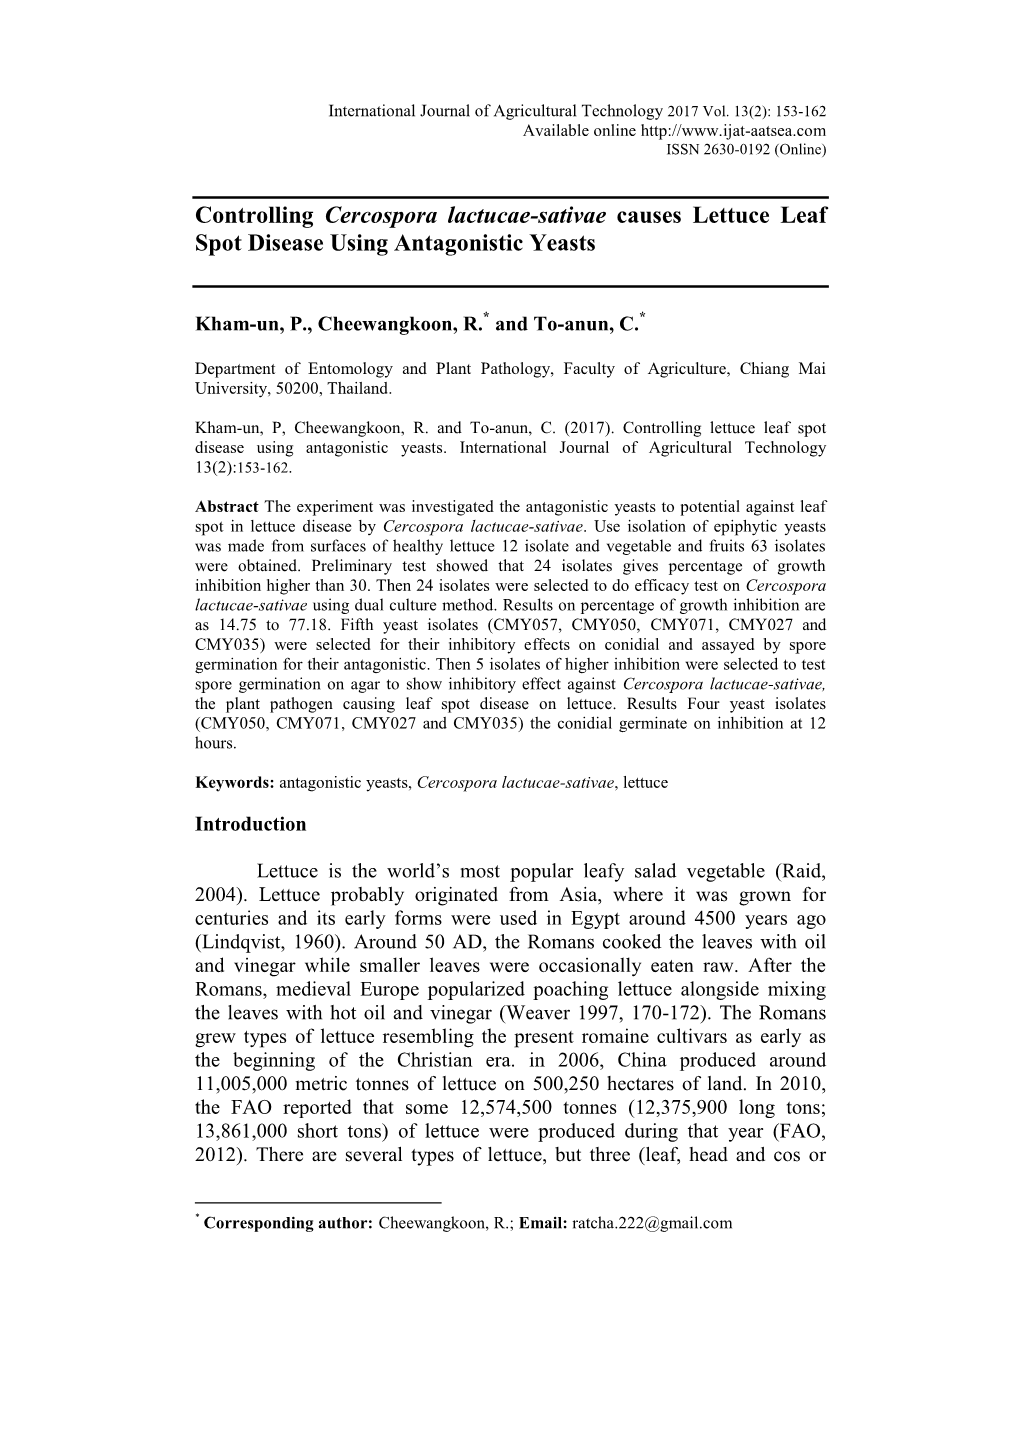 Controlling Lettuce Leaf Spot Disease Using Antagonistic Yeasts. International Journal of Agricultural Technology 13(2):153-162